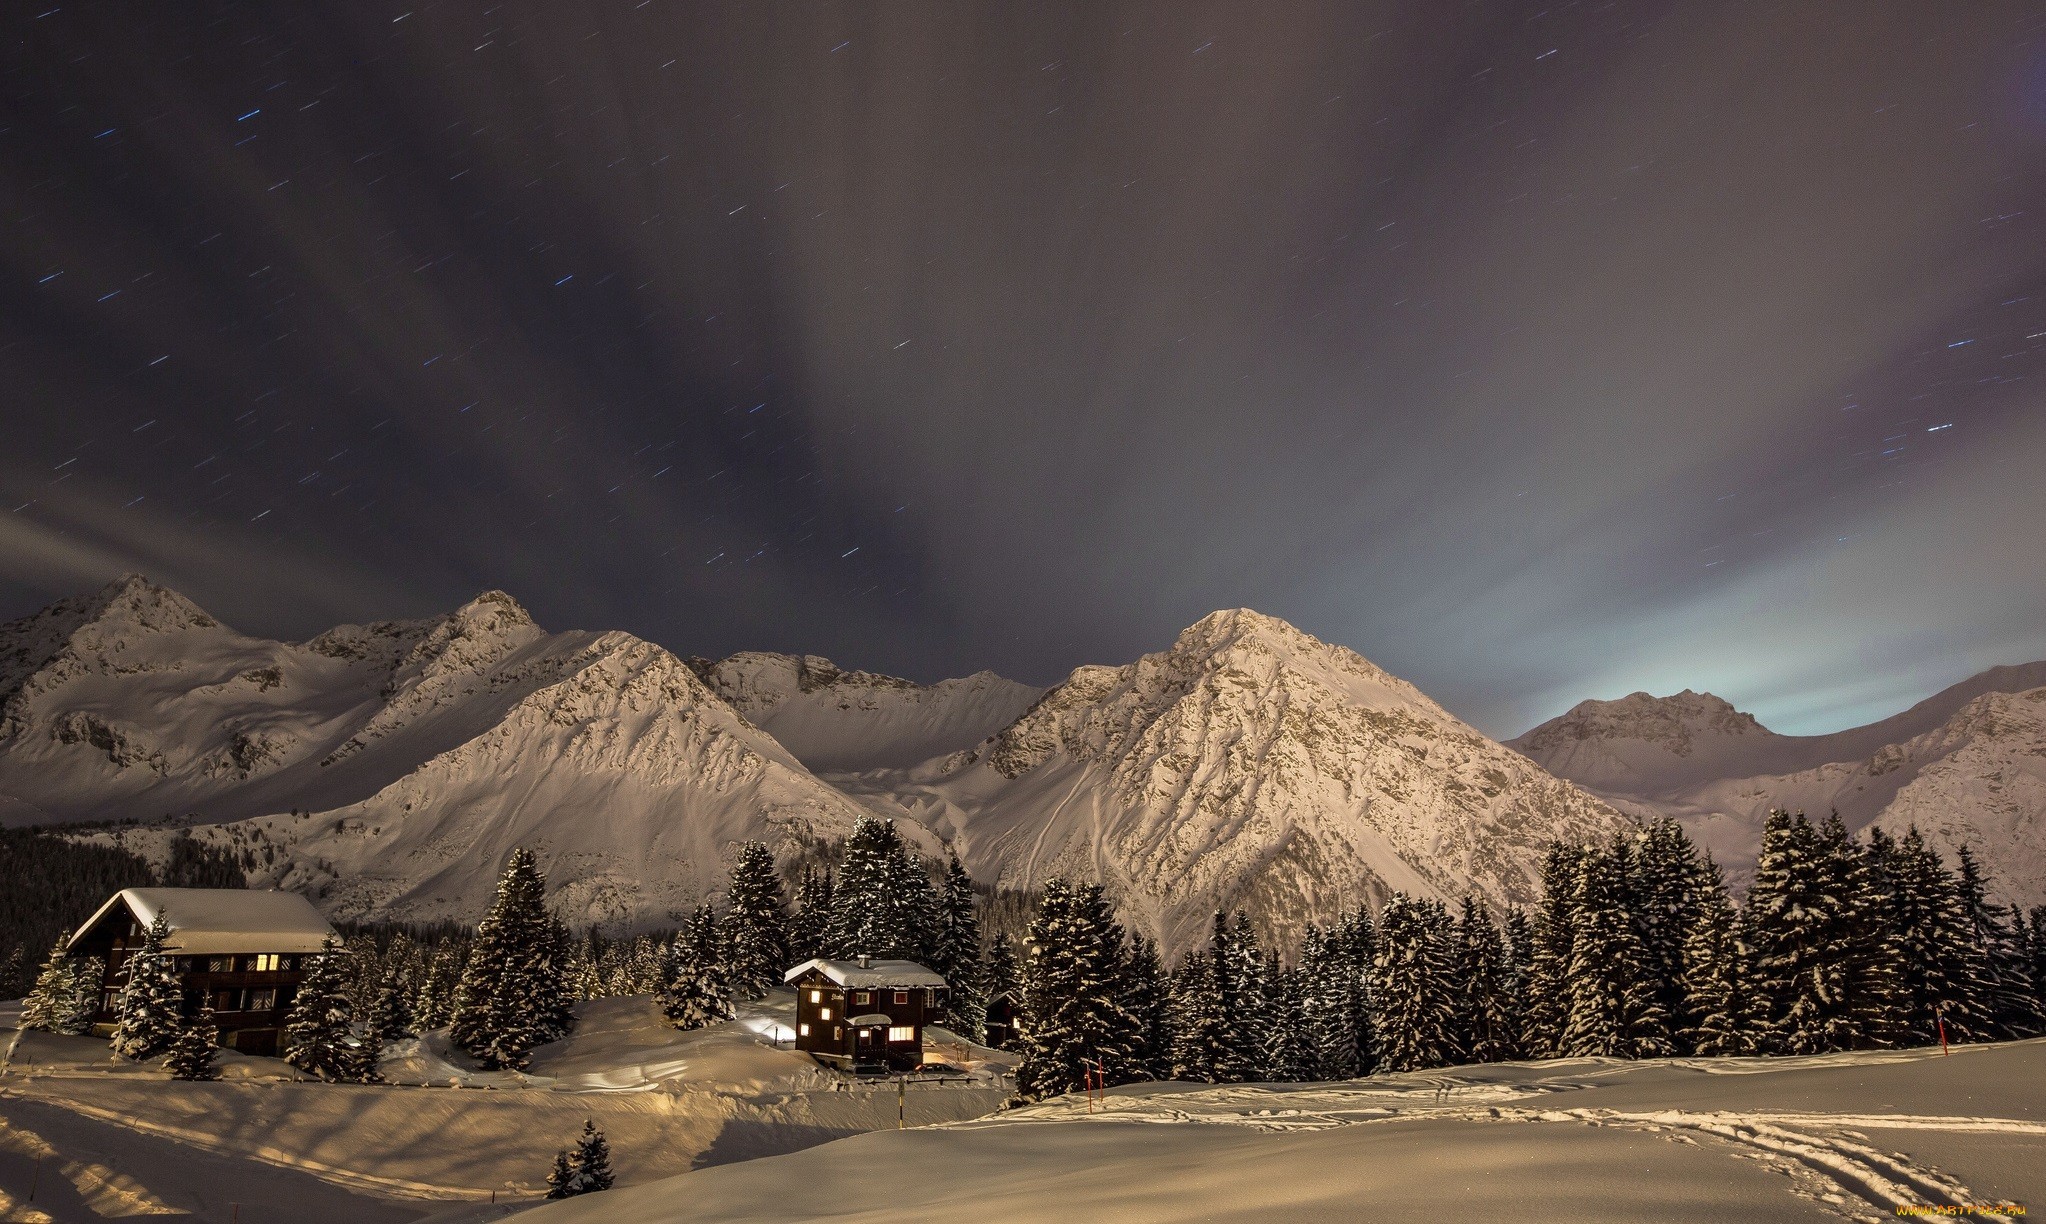 General 2046x1224 mountains snow landscape nature winter cabin snowy peak snowy mountain cold ice outdoors night